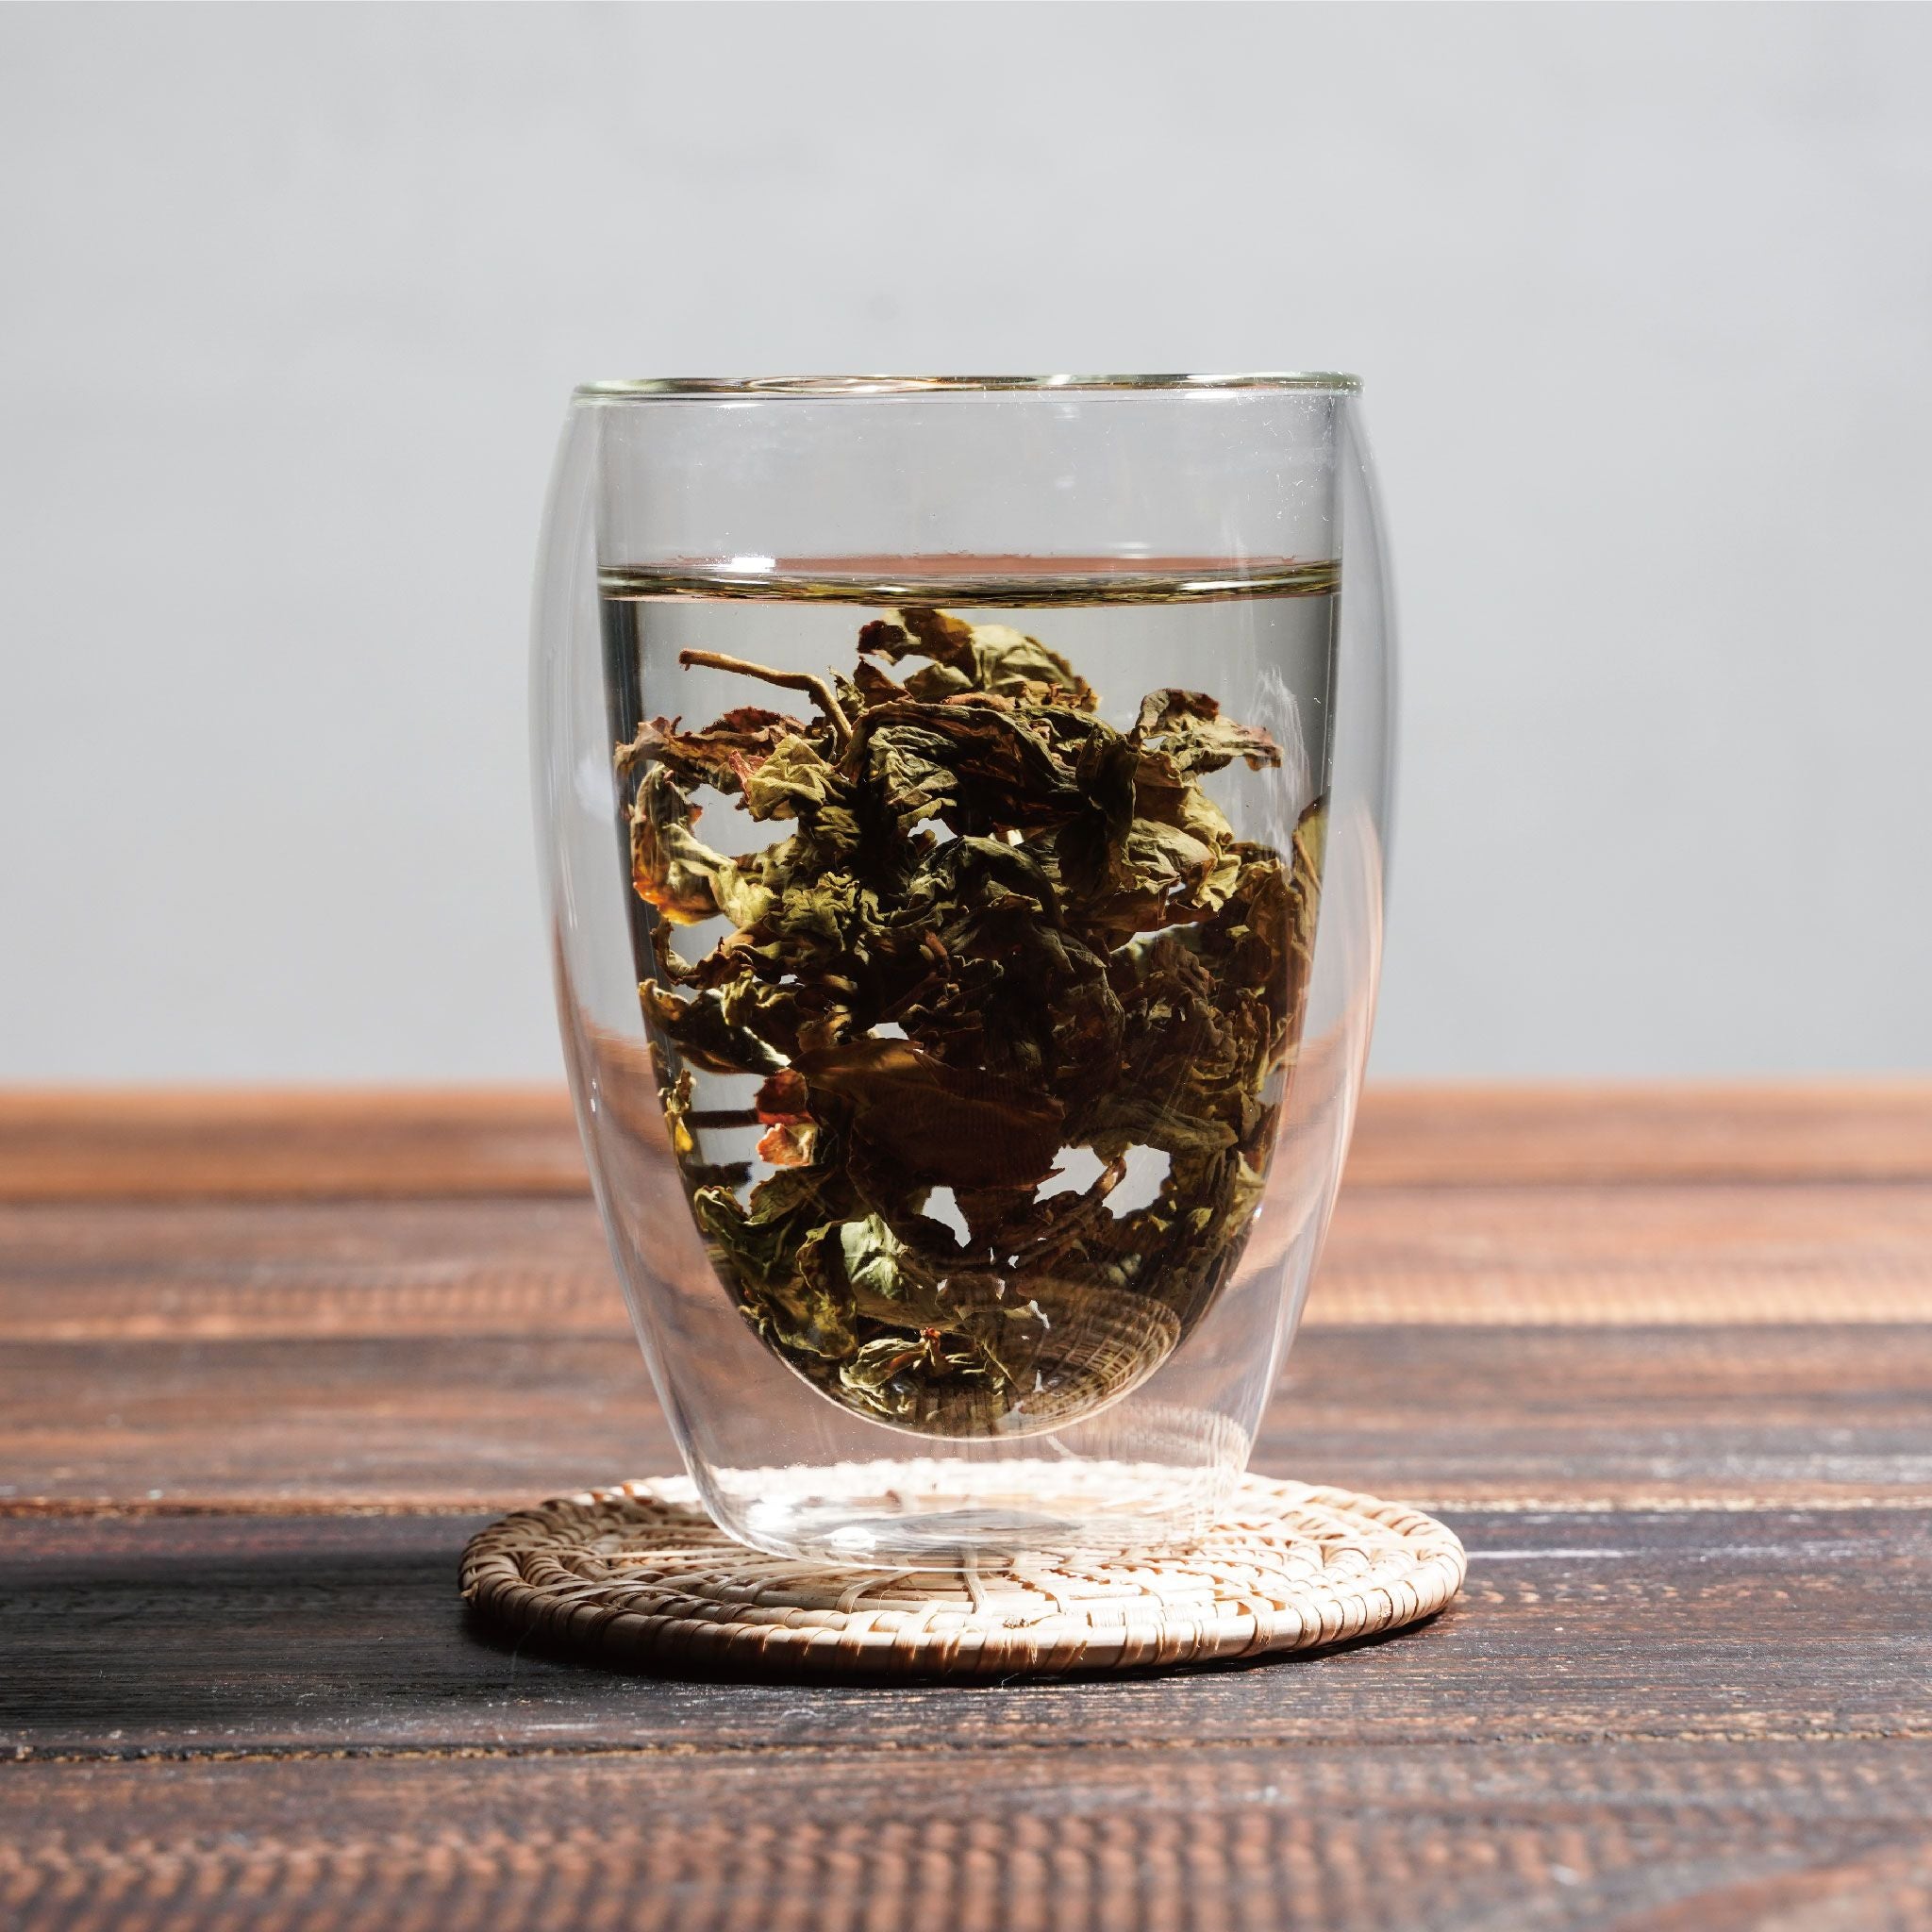 dong ding frozen summit wet tea leaves floating in cup